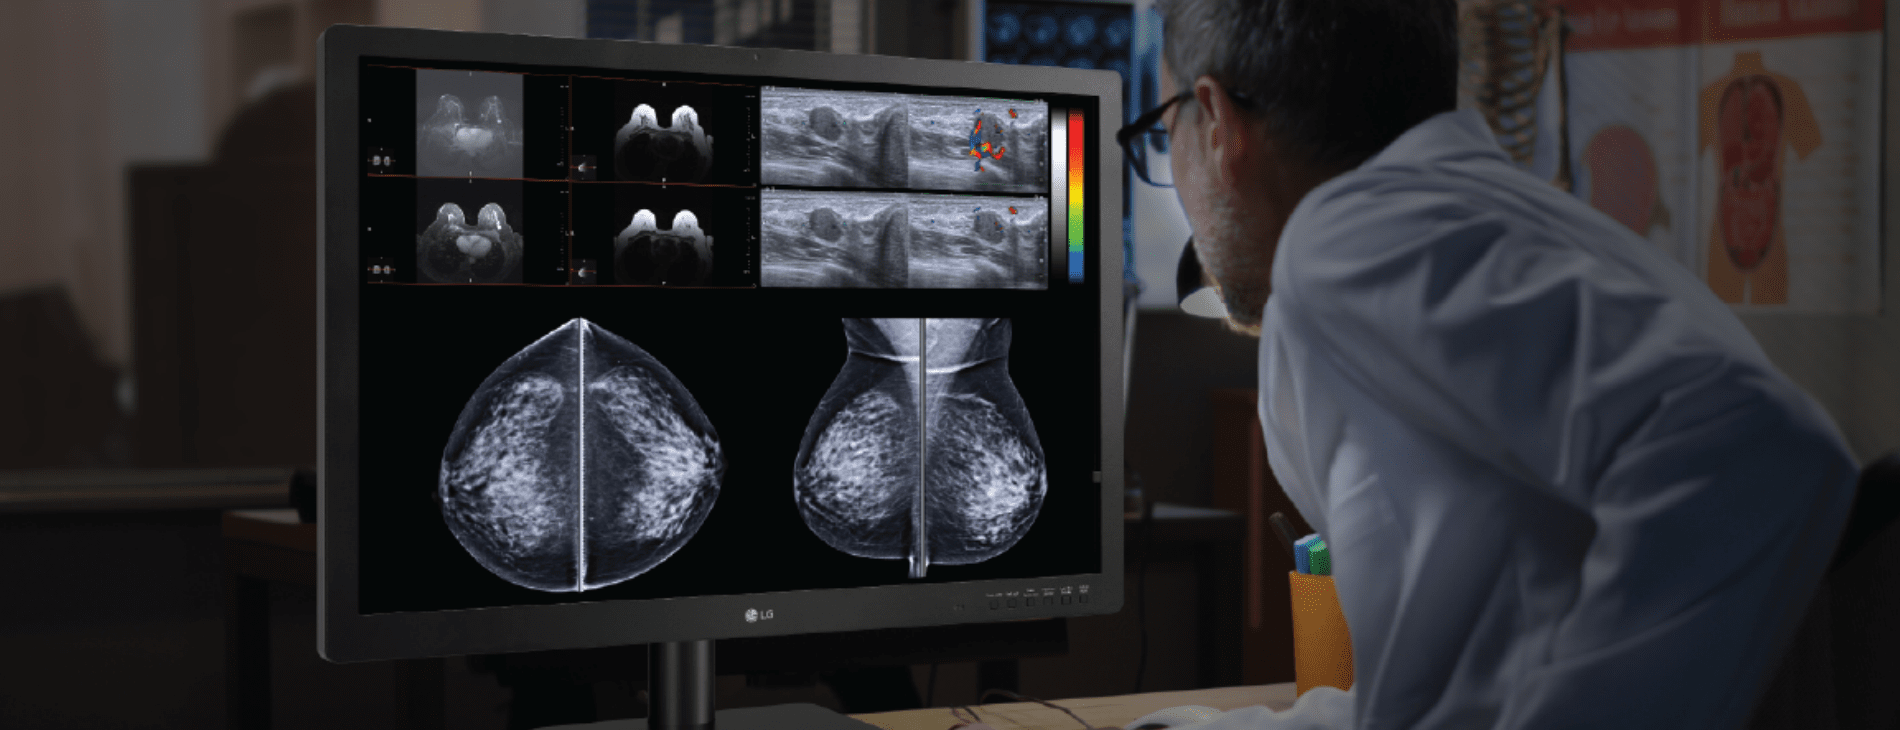 Radiologist analyzing diagnostic scans on LG medical monitor for accurate diagnosis.